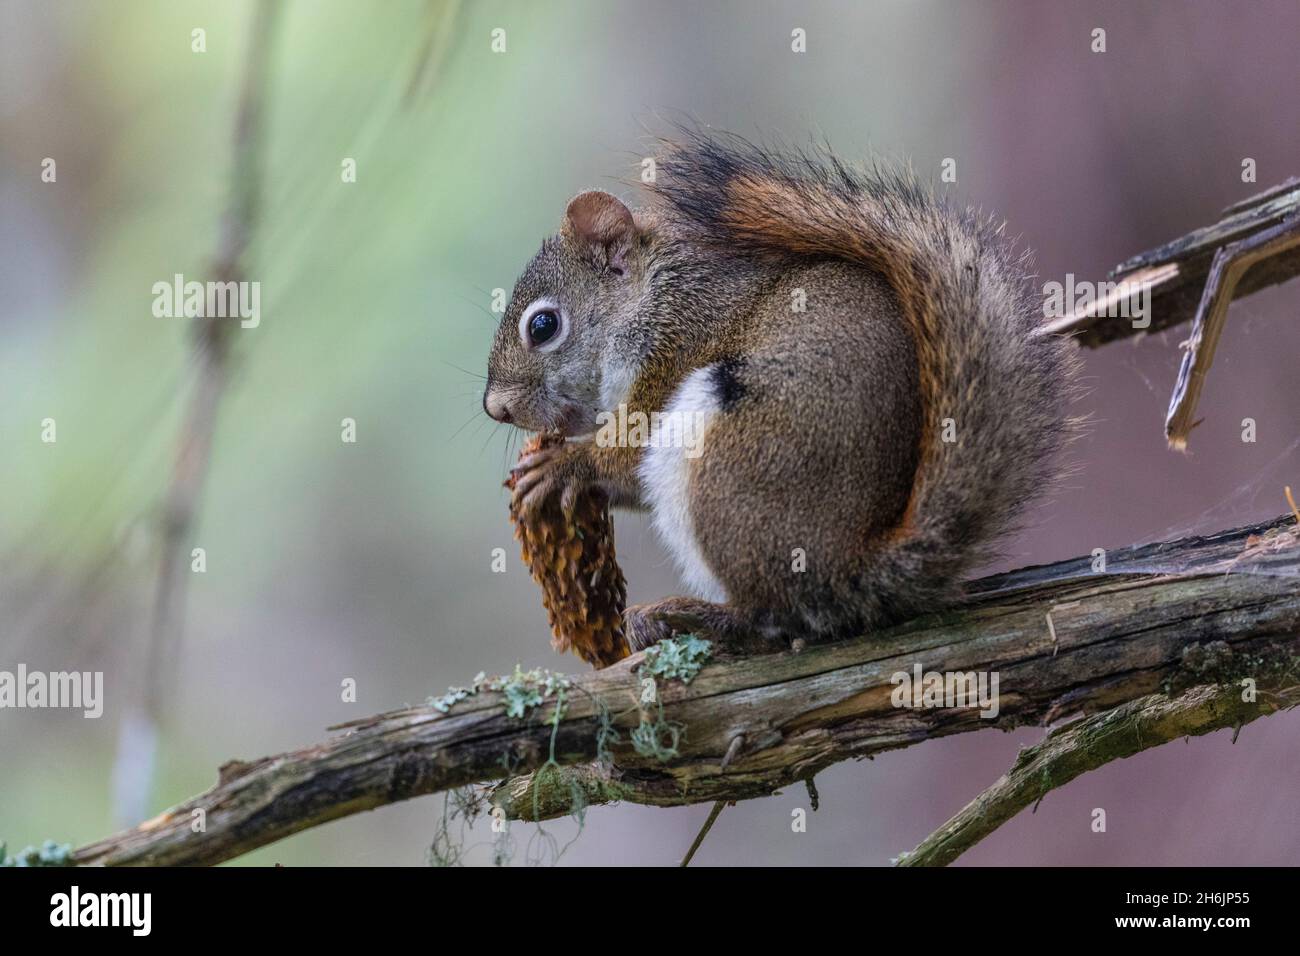 An adult American red squirrel (Tamiasciurus hudsonicus) near the Chilkat River, Haines, Southeast Alaska, United States of America, North America Stock Photo